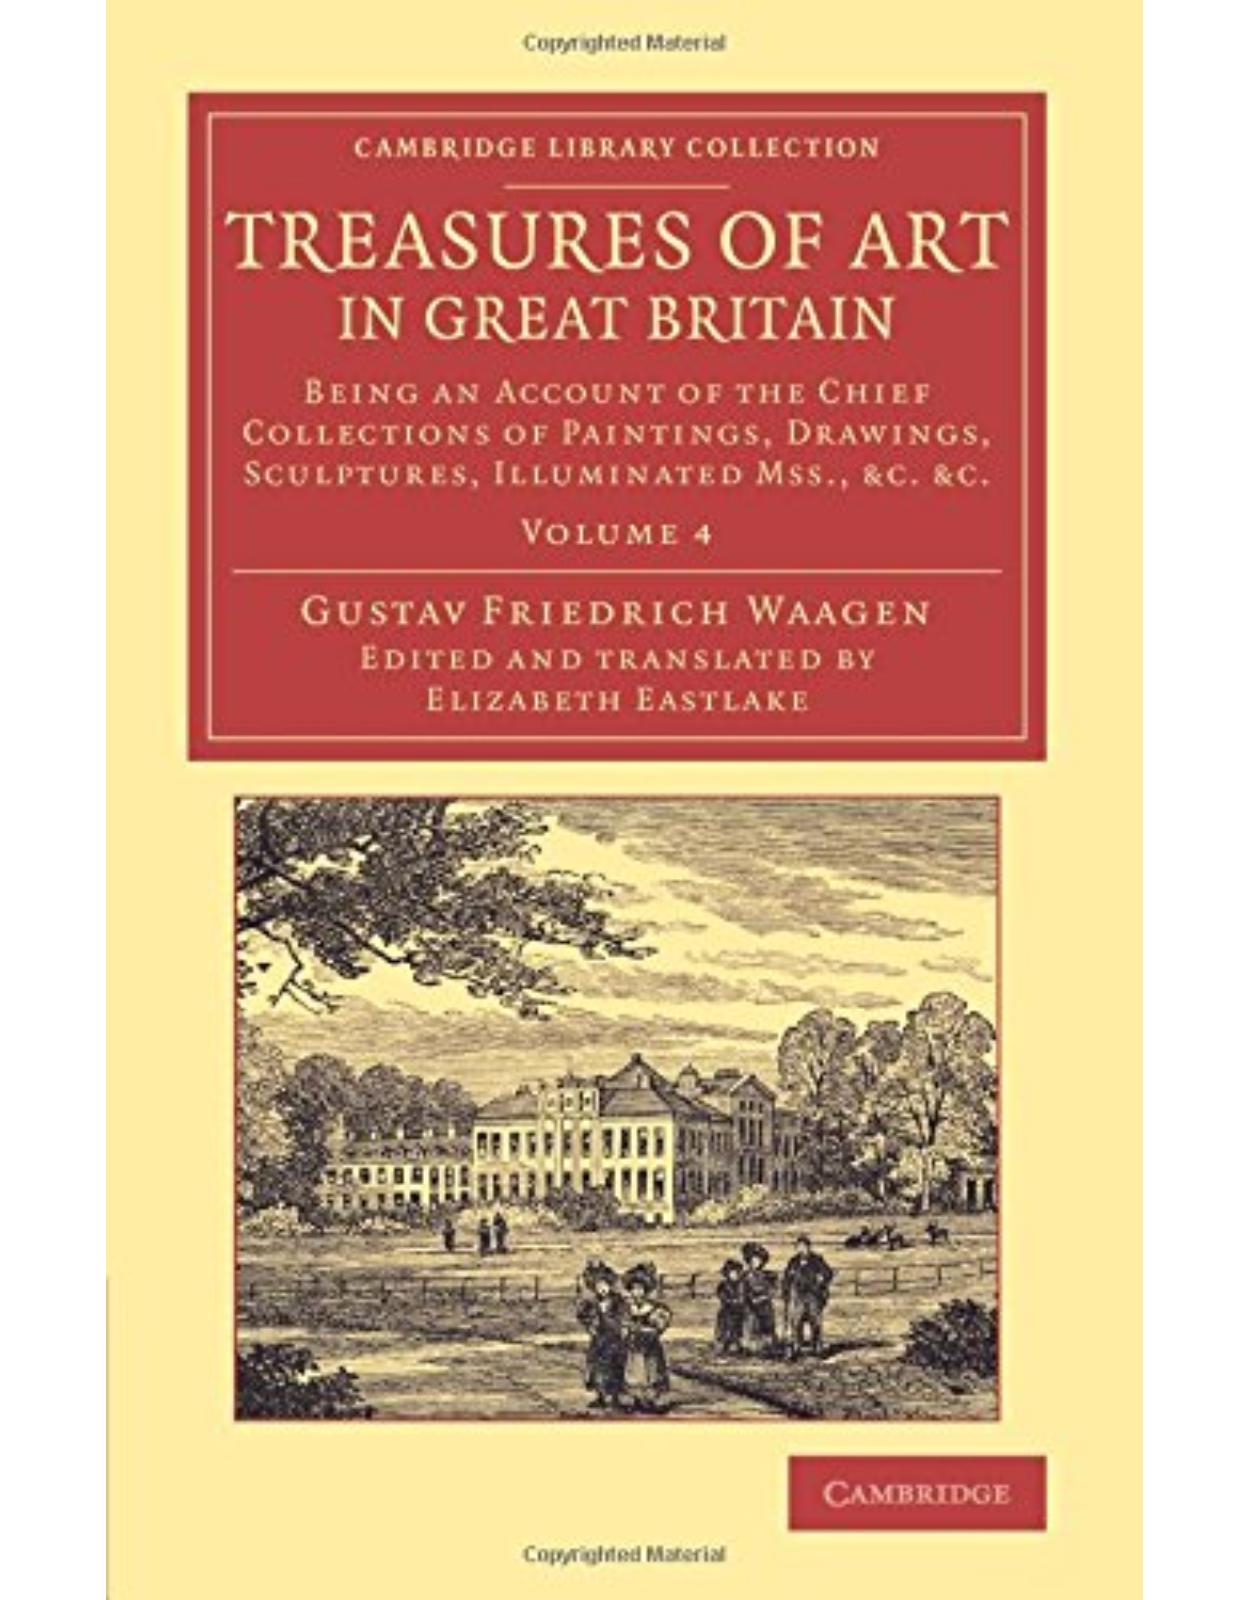 Treasures of Art in Great Britain: Being an Account of the Chief Collections of Paintings, Drawings, Sculptures, Illuminated Mss. (Volume 4)